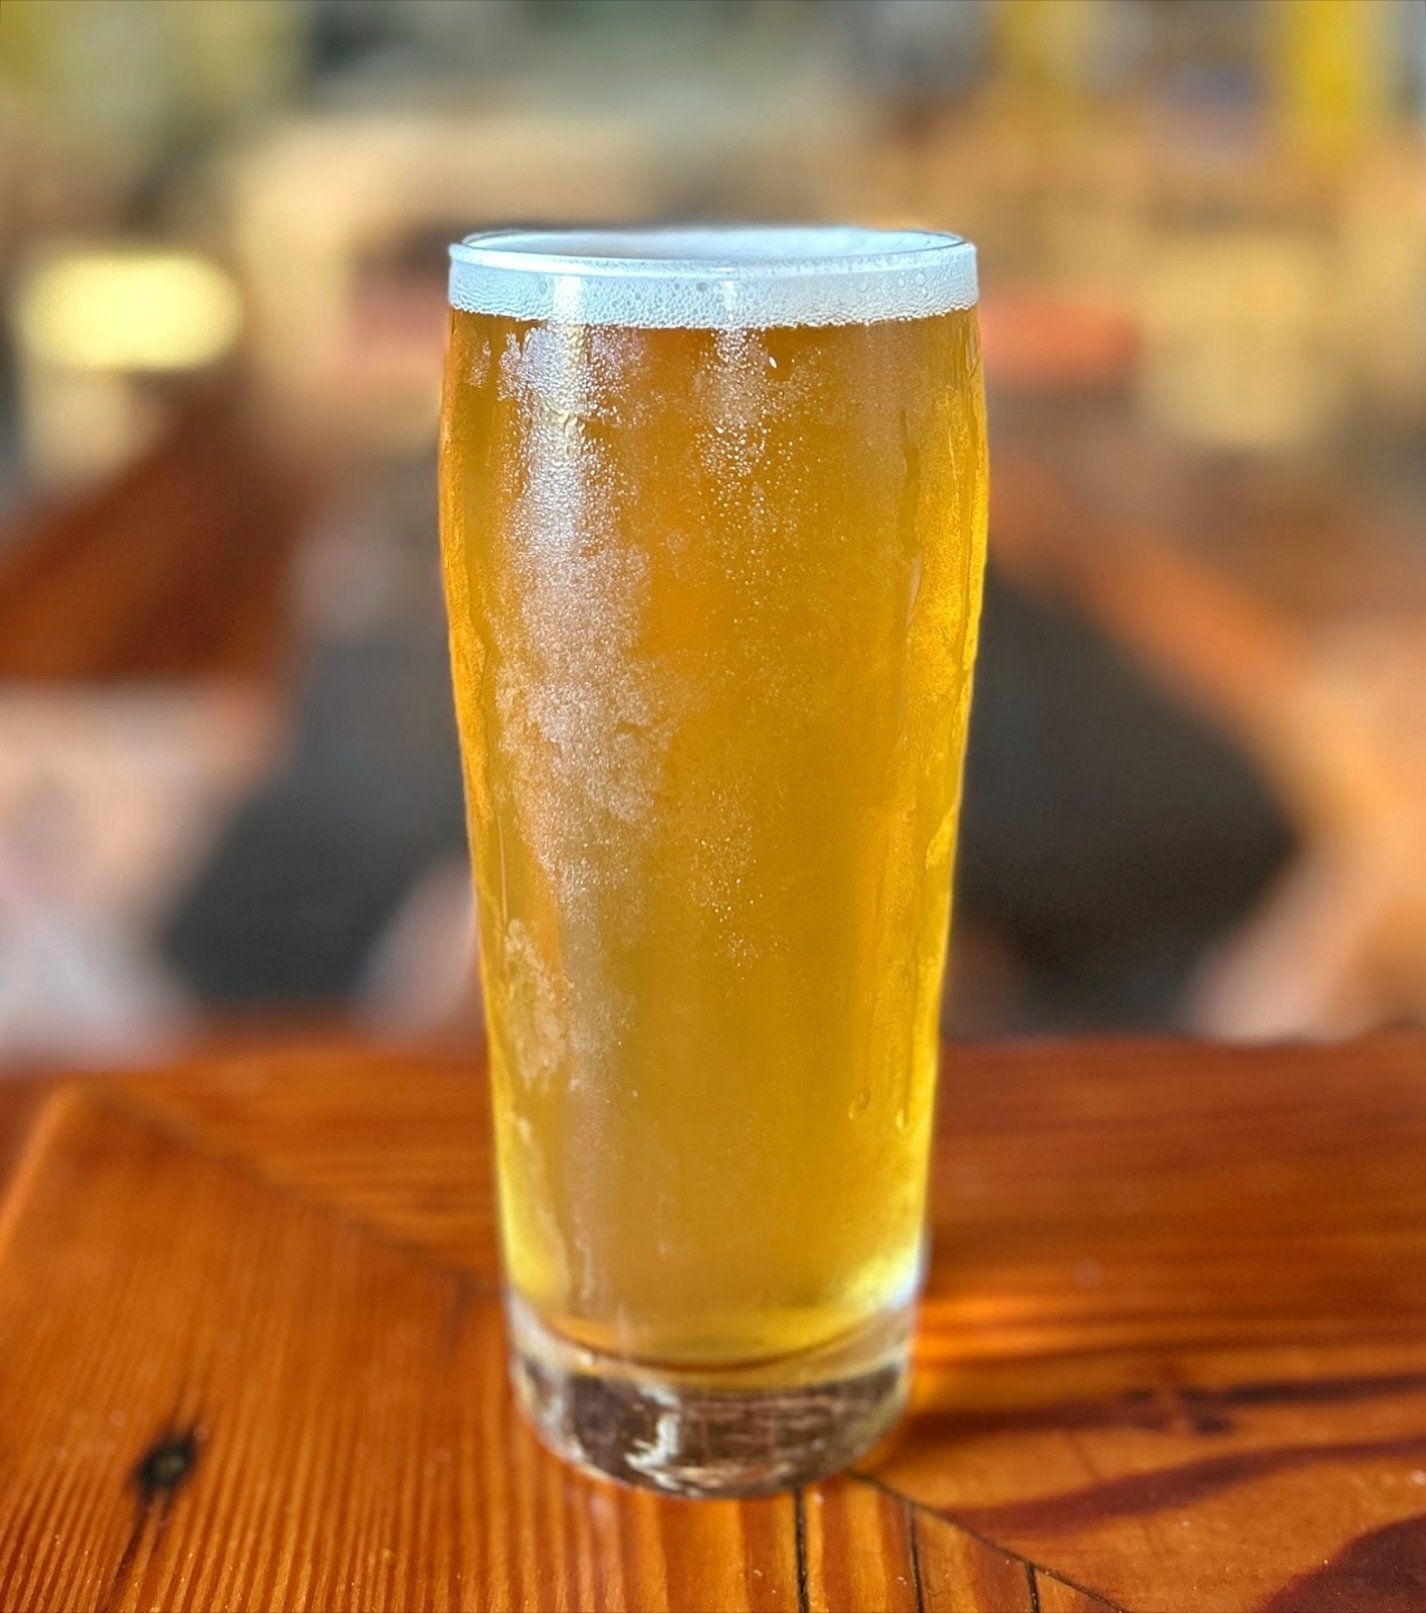 DUDE INCREDIBLE 🍺 5.7% abv
Our first West Coast Pils with a big hop aroma from Enigma and Motueka is clean, bitter, and easy drinking with all the hoppy goodness of a West Coast IPA and lower ABV of a Pilsner. It&rsquo;s the best of both worlds! The